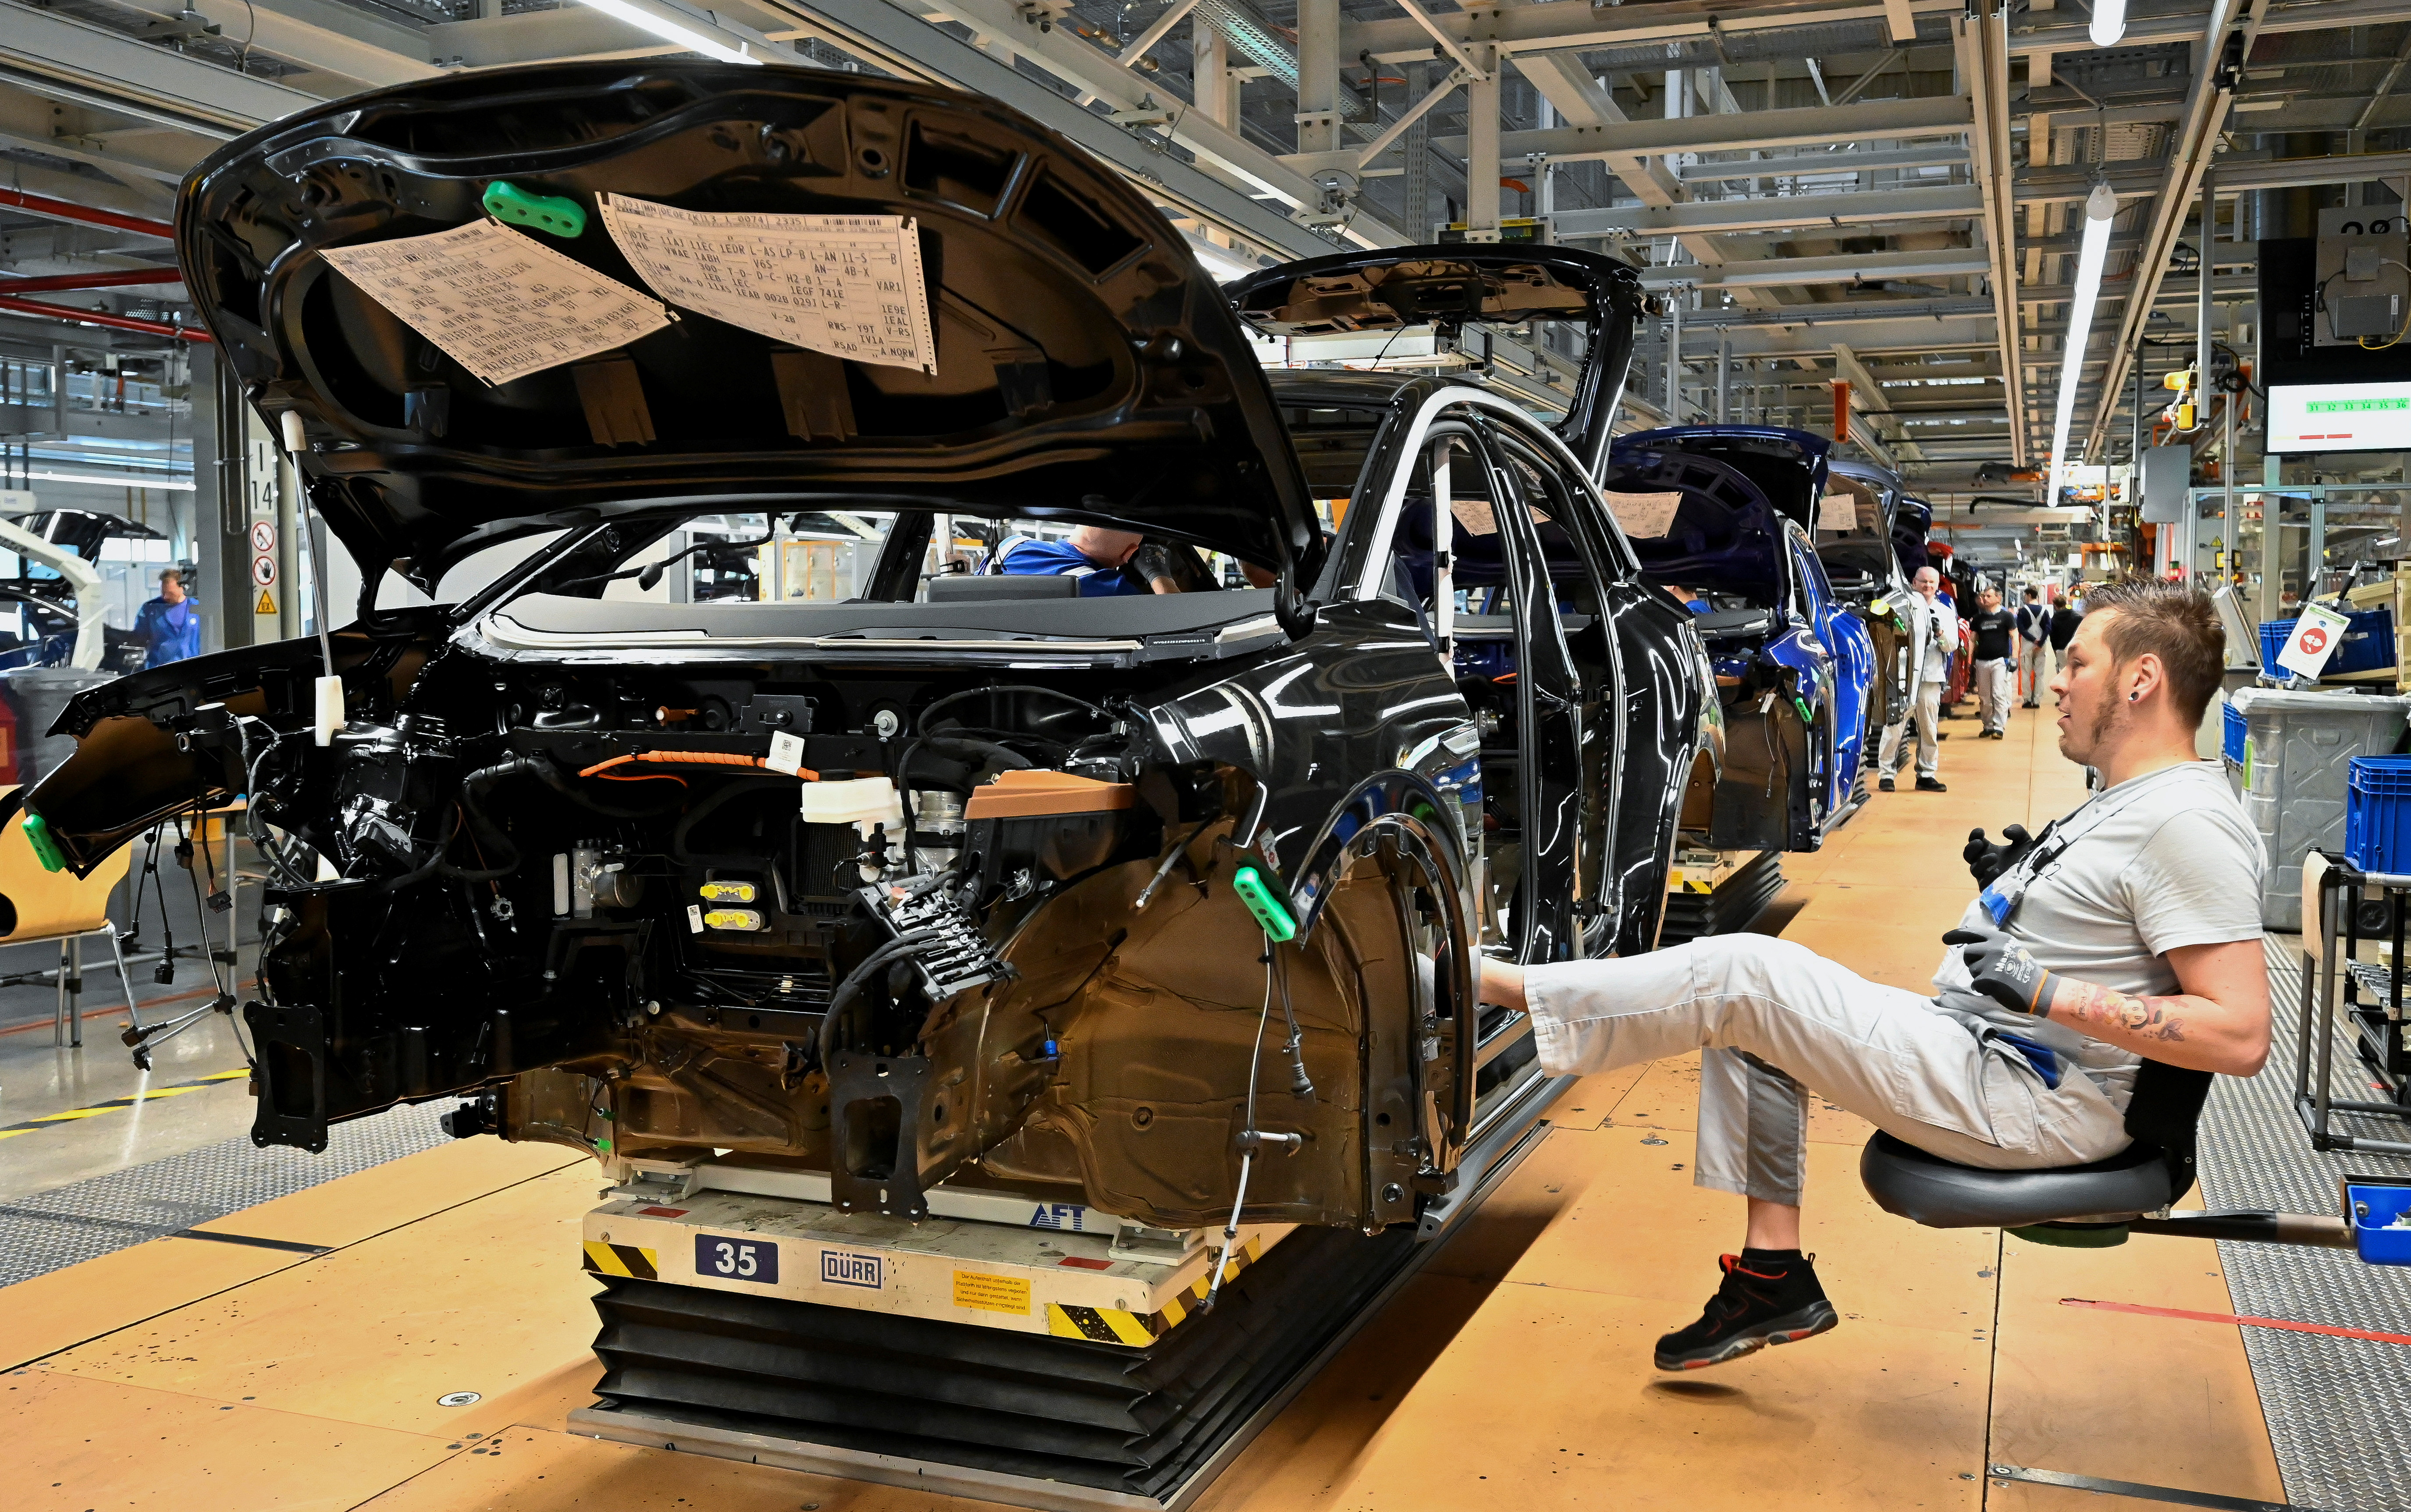 Technicians work at the production line for electric car models of the Volkswagen Group, in Zwickau